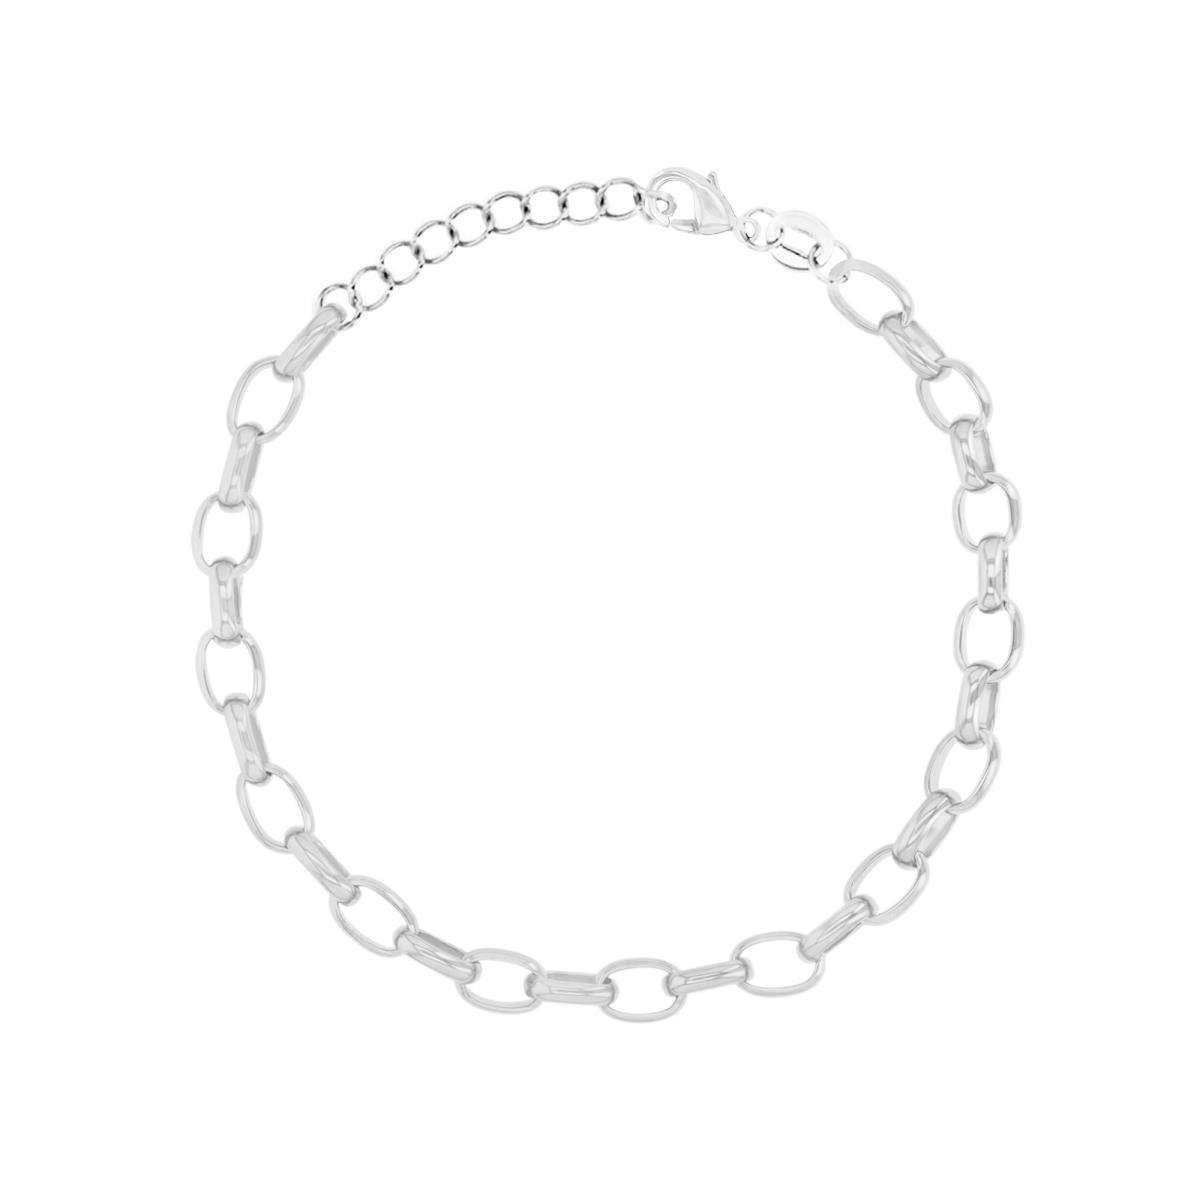 Brass White 7mm Flat Oval Link Chain 9+1" Anklet